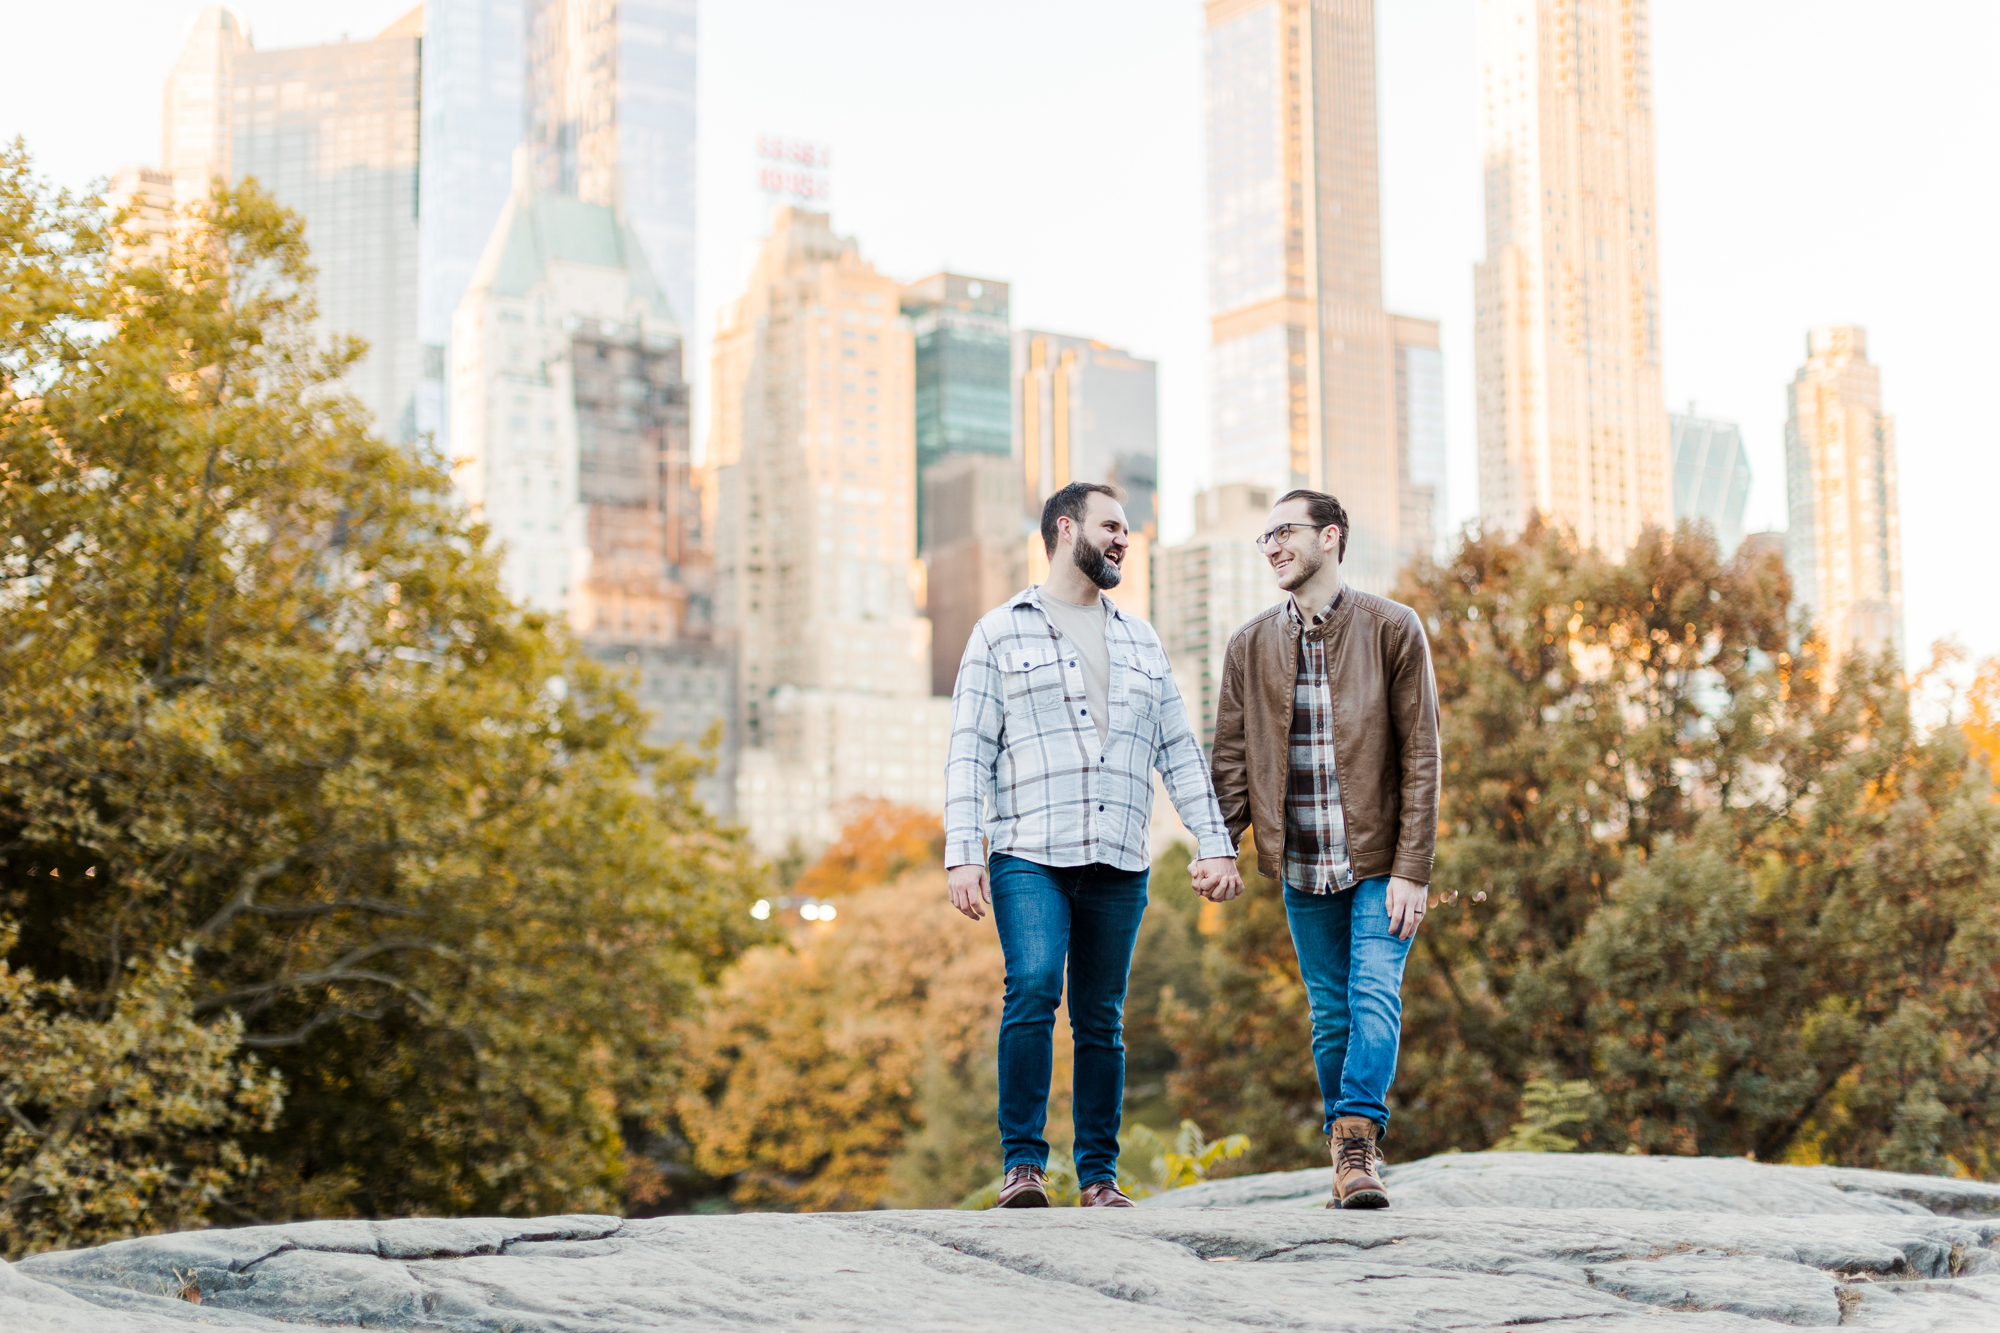 Joyful Central Park Engagement Photo Shoot in Fall